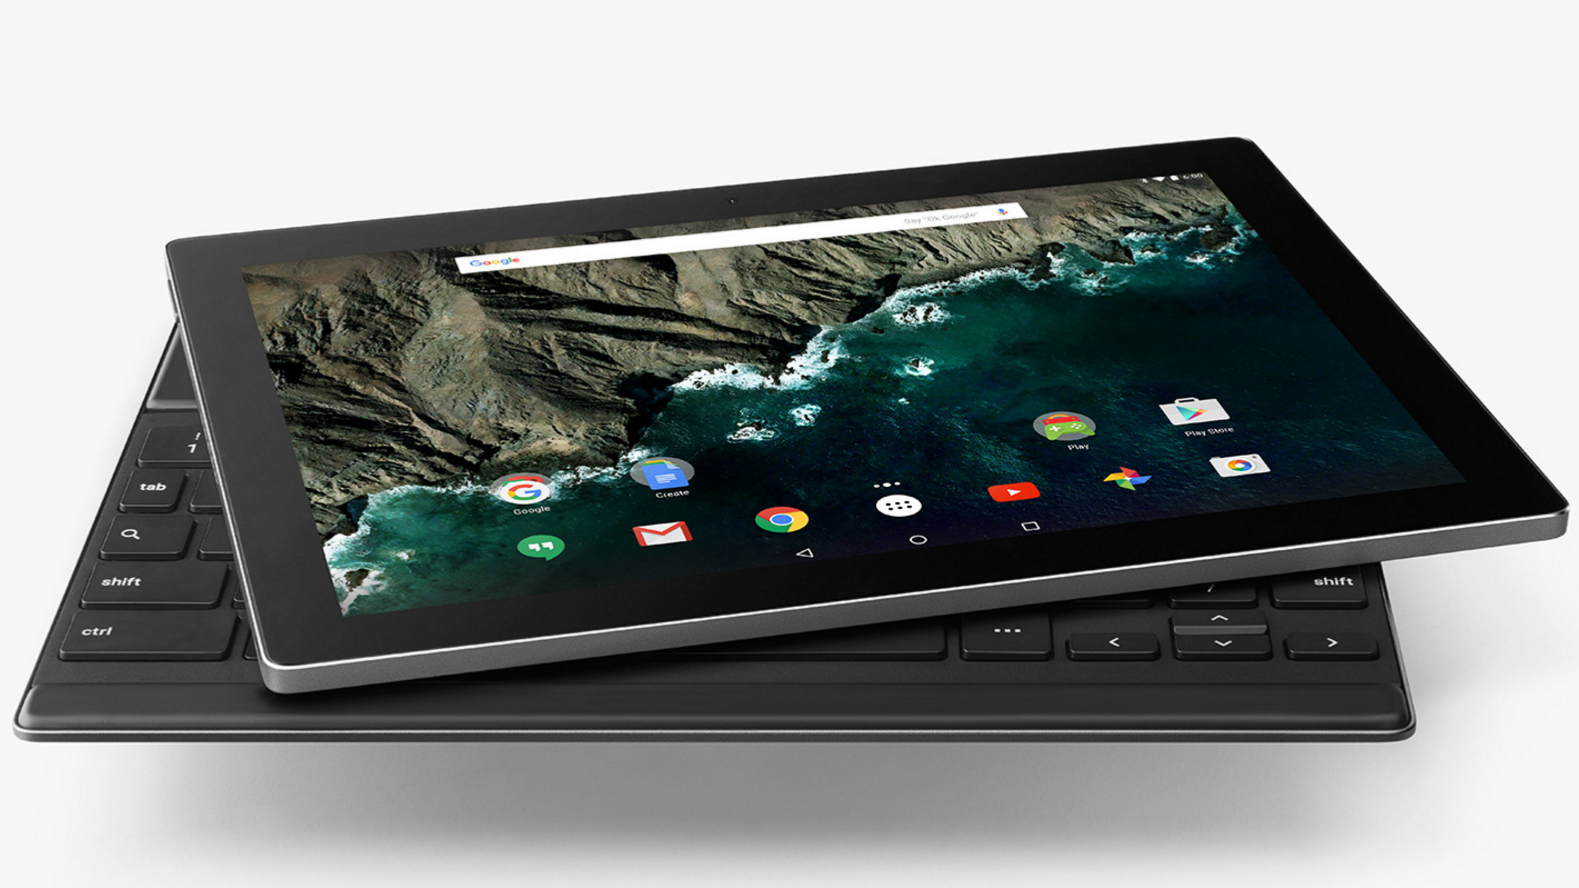 Deal: The Google Pixel C and its keyboard can be purchased together for $150 off